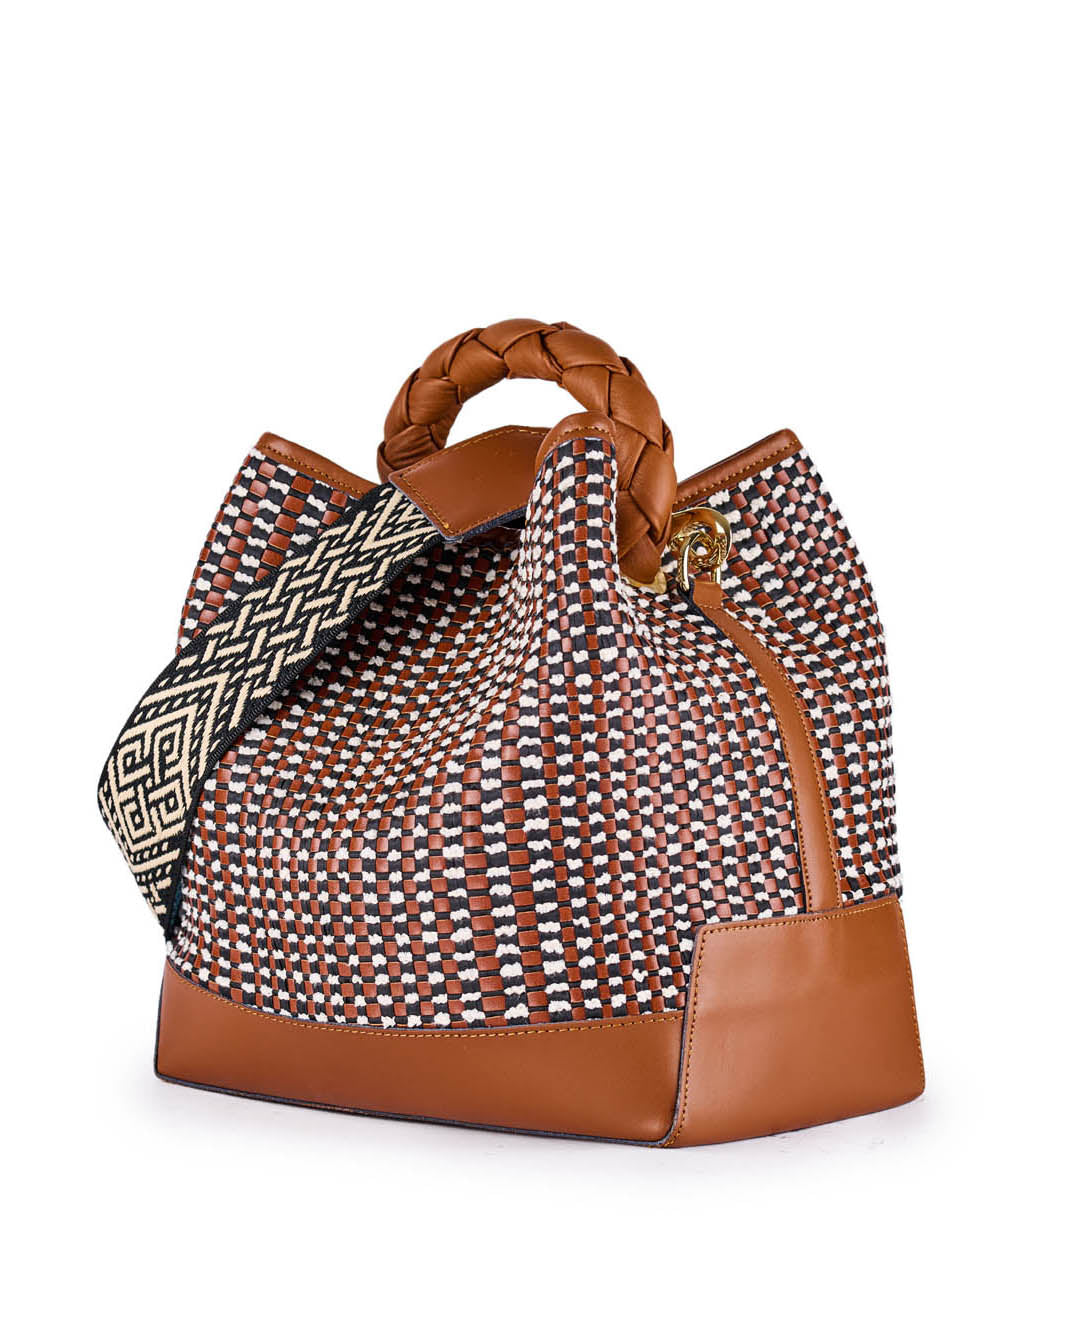 Luxurious brown and white woven leather handbag with patterned shoulder strap